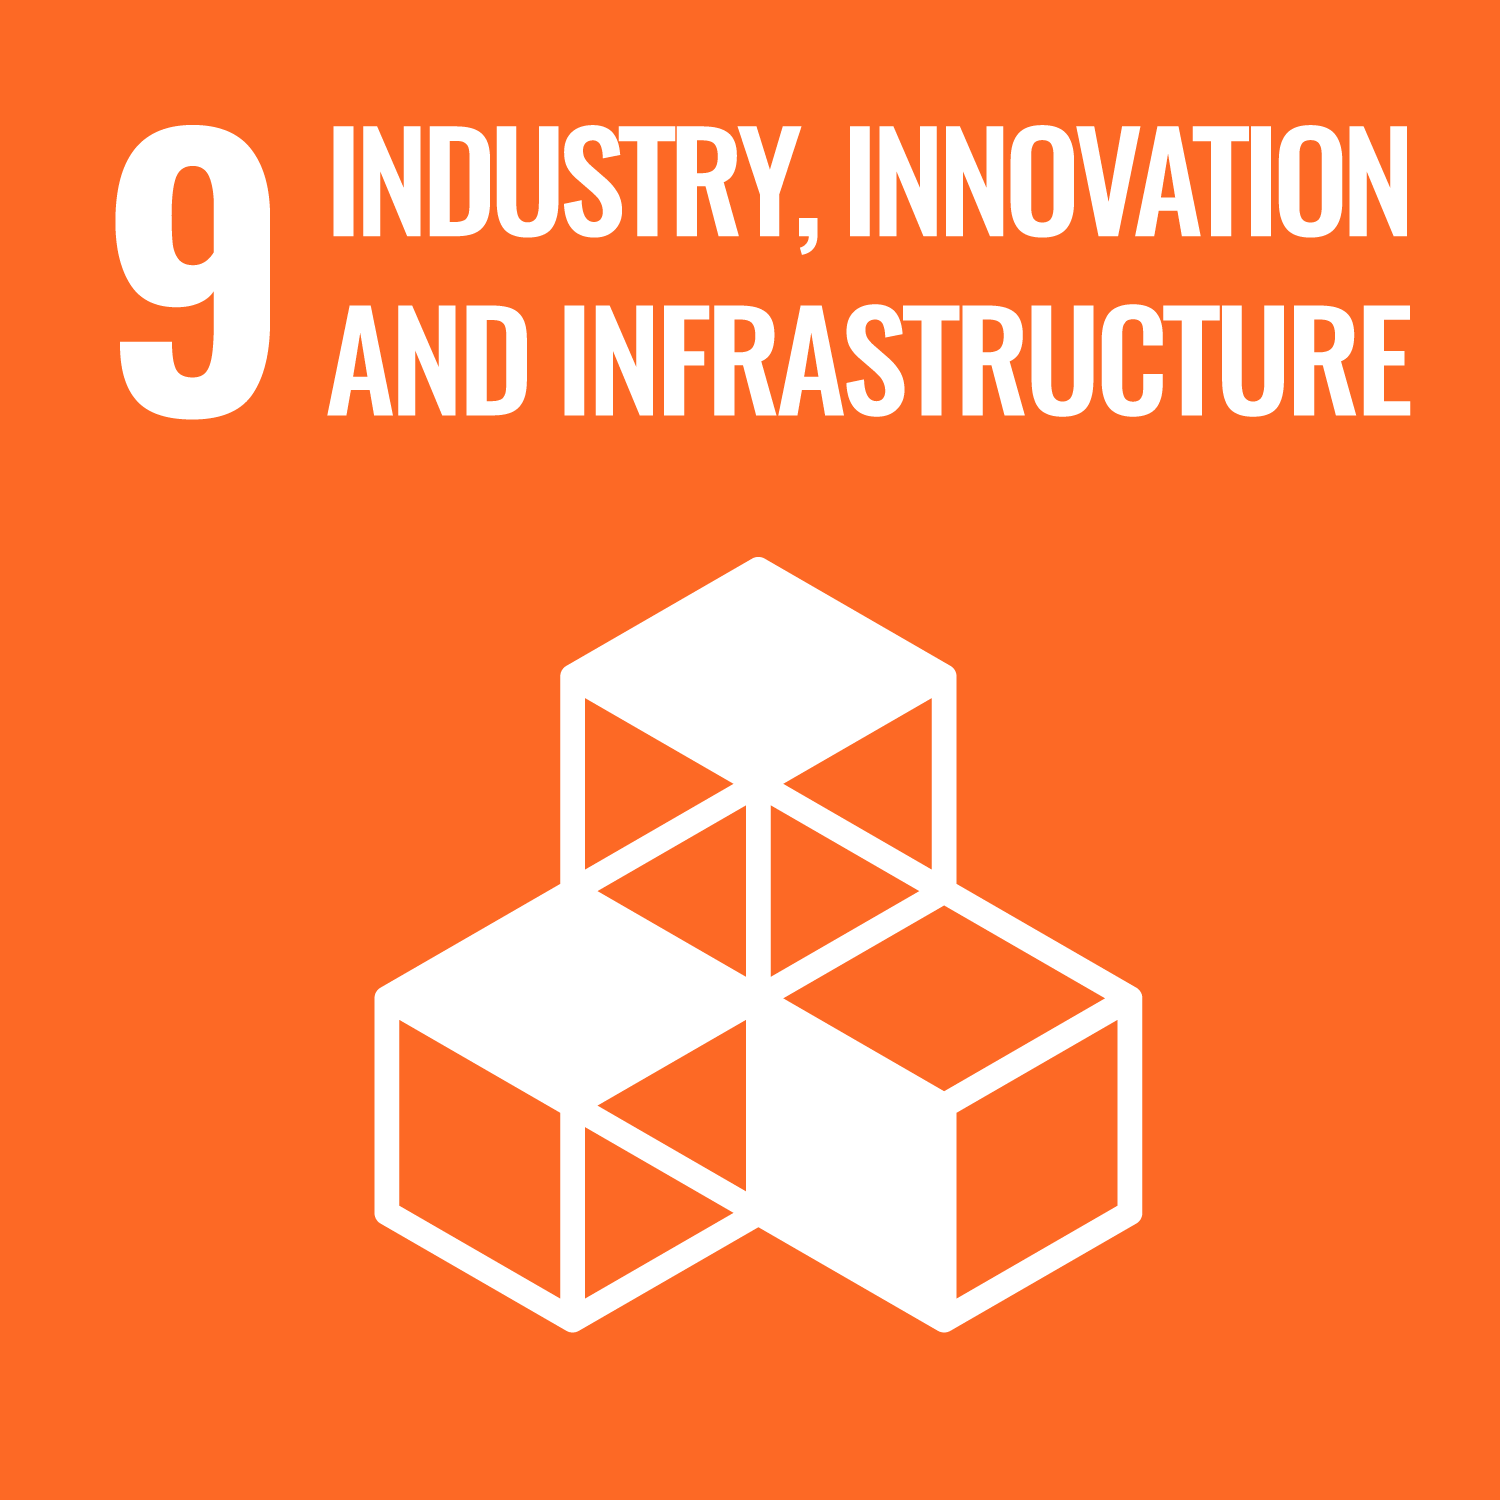 United Nations Sustainable Development Goal Number 9: Industry, Innovation, and Infrastructure